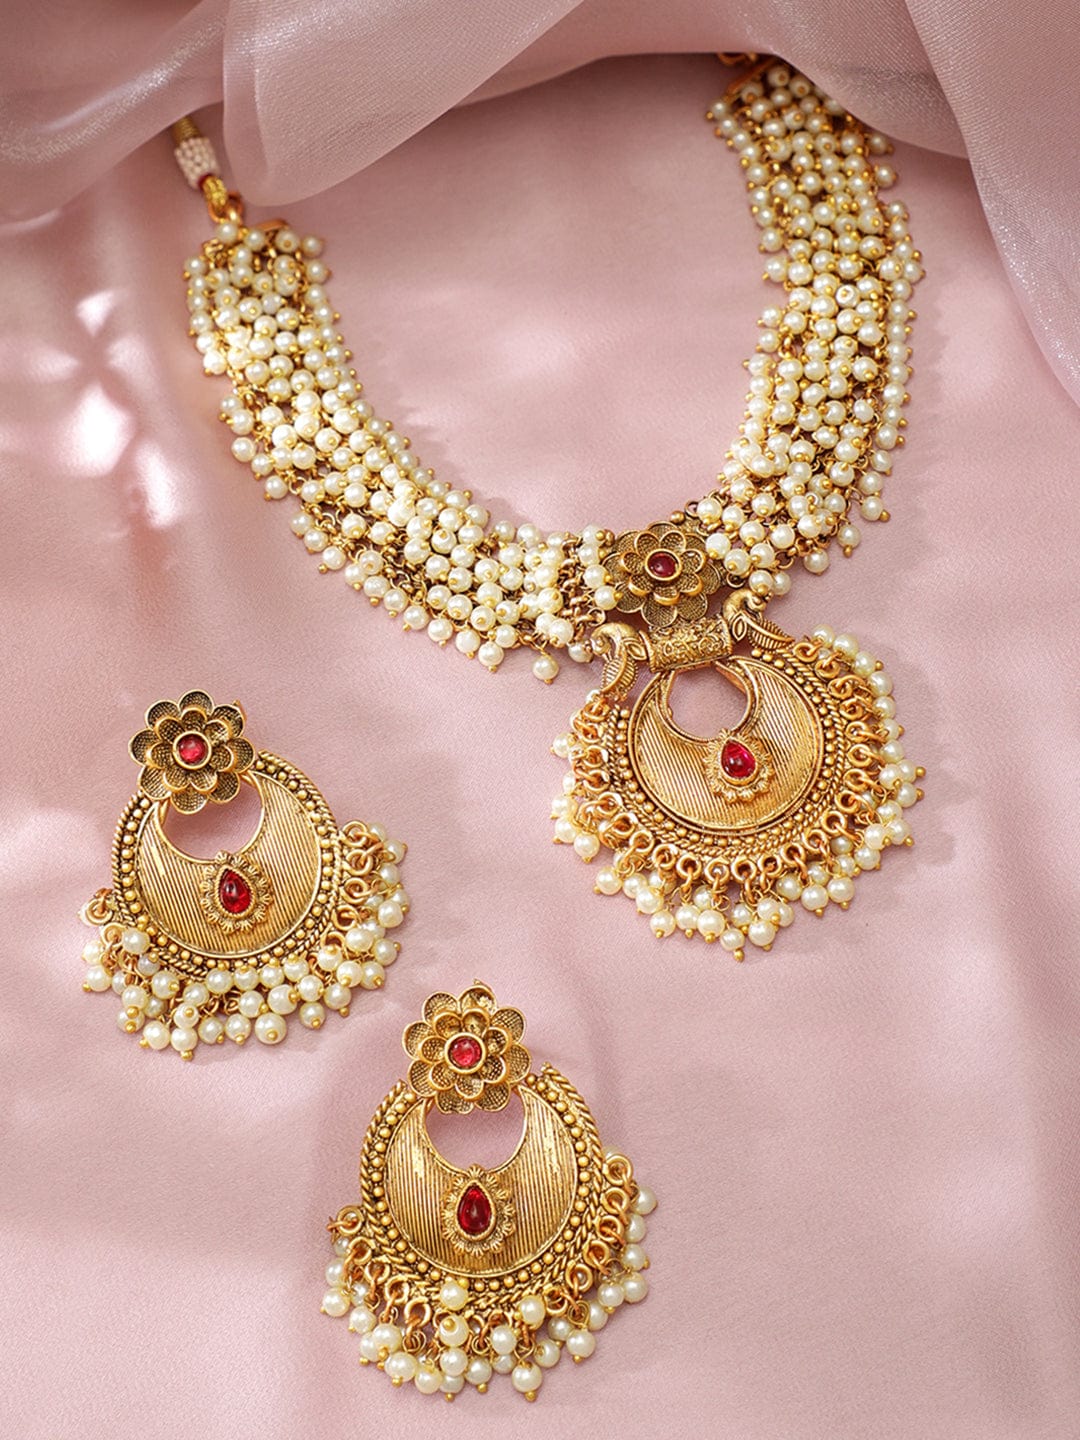 Rubans 20K Gold Plated Necklace Set With Floral Design, Pink Stone And Pearls. Necklace Set